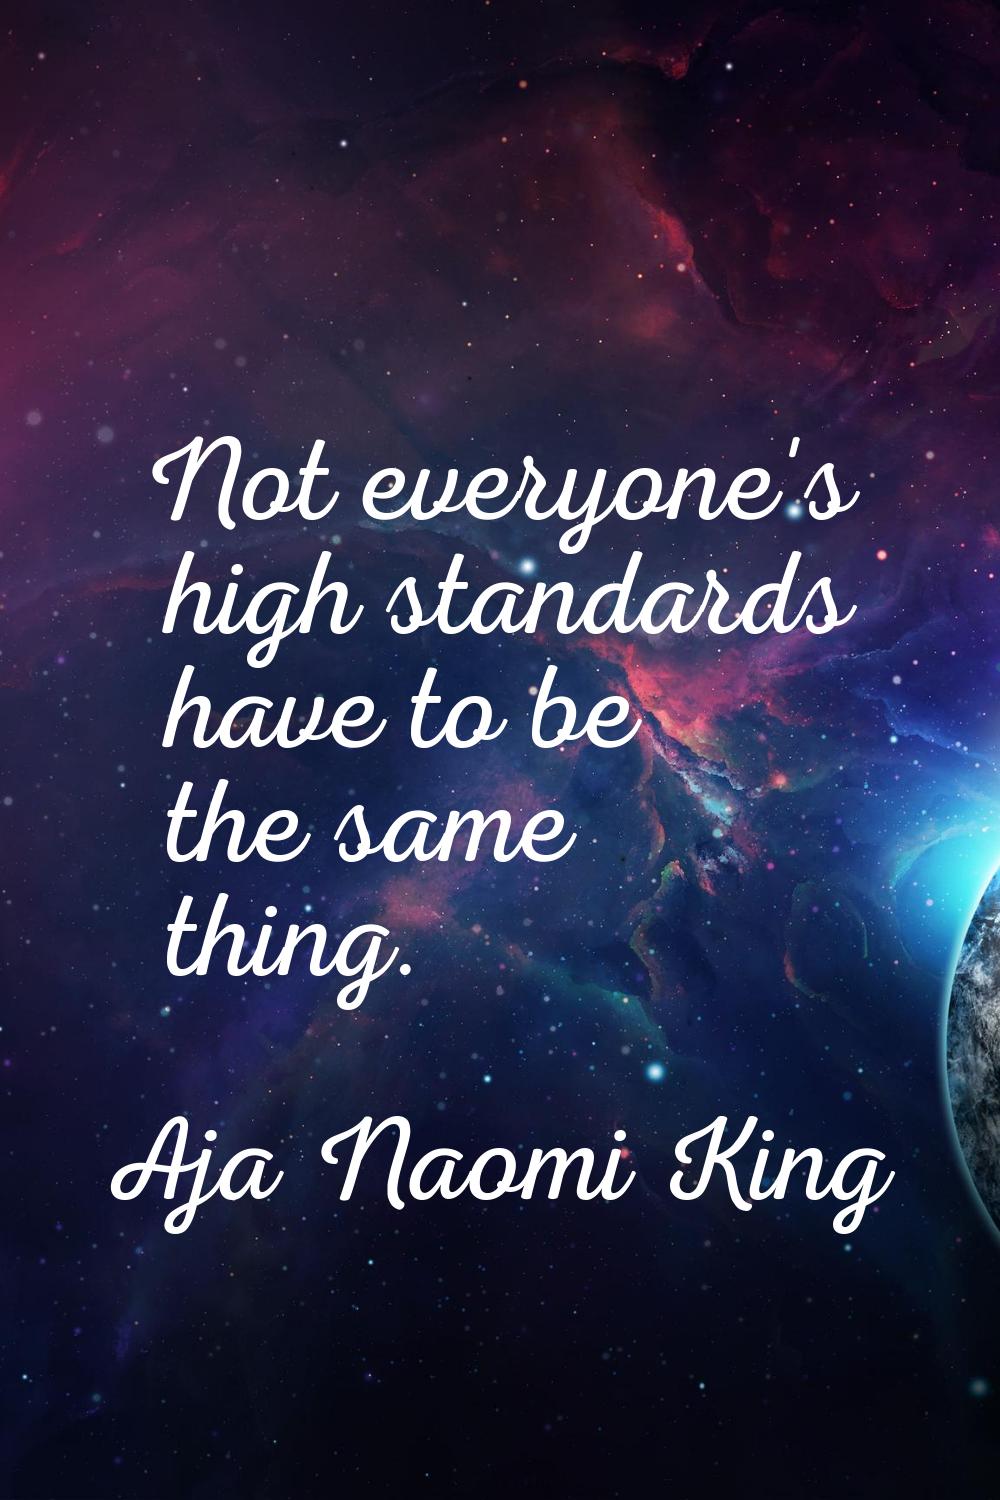 Not everyone's high standards have to be the same thing.